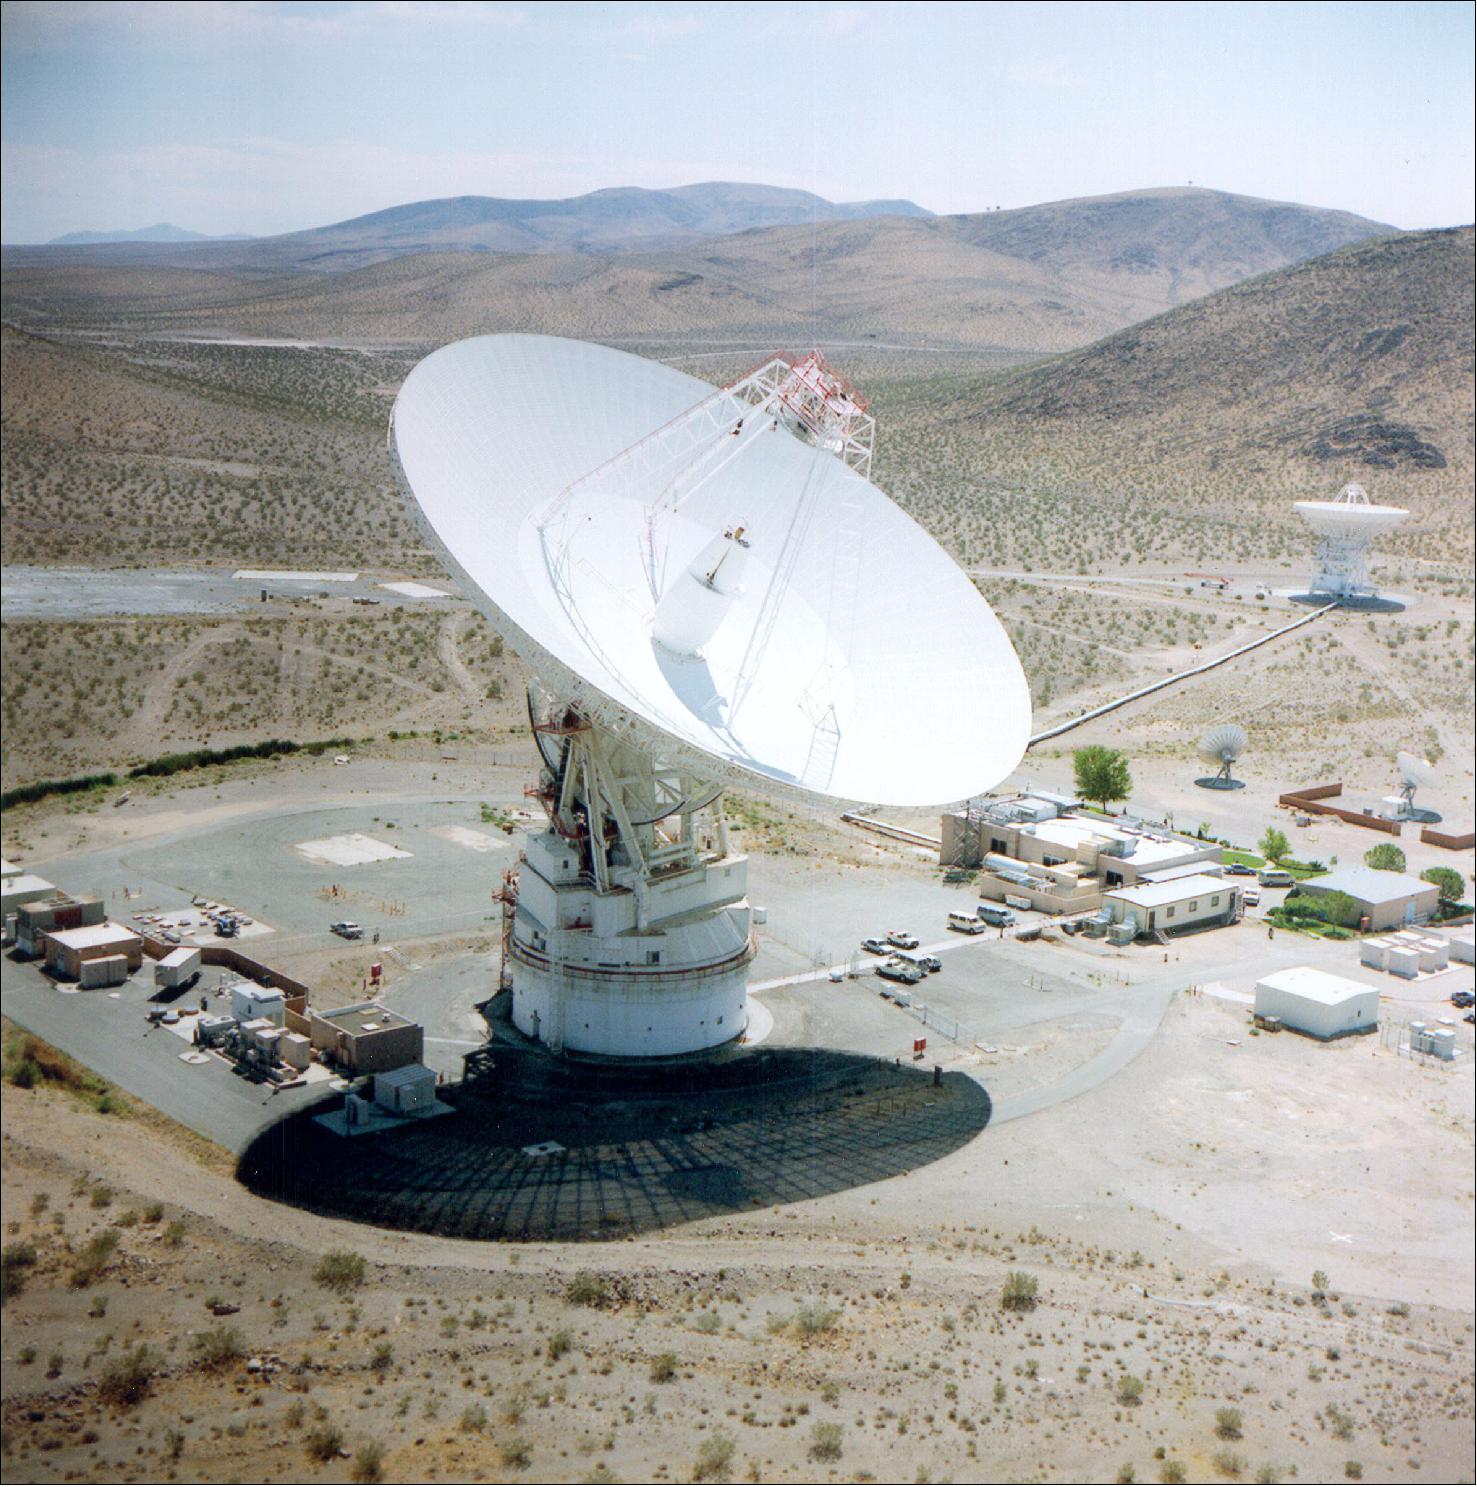 Figure 4: Deep Space Station-14 (DSS-14) located at Goldstone Deep Space Communications Complex (GDSCC), image credit: Goldstone Deep Space Communications Complex)